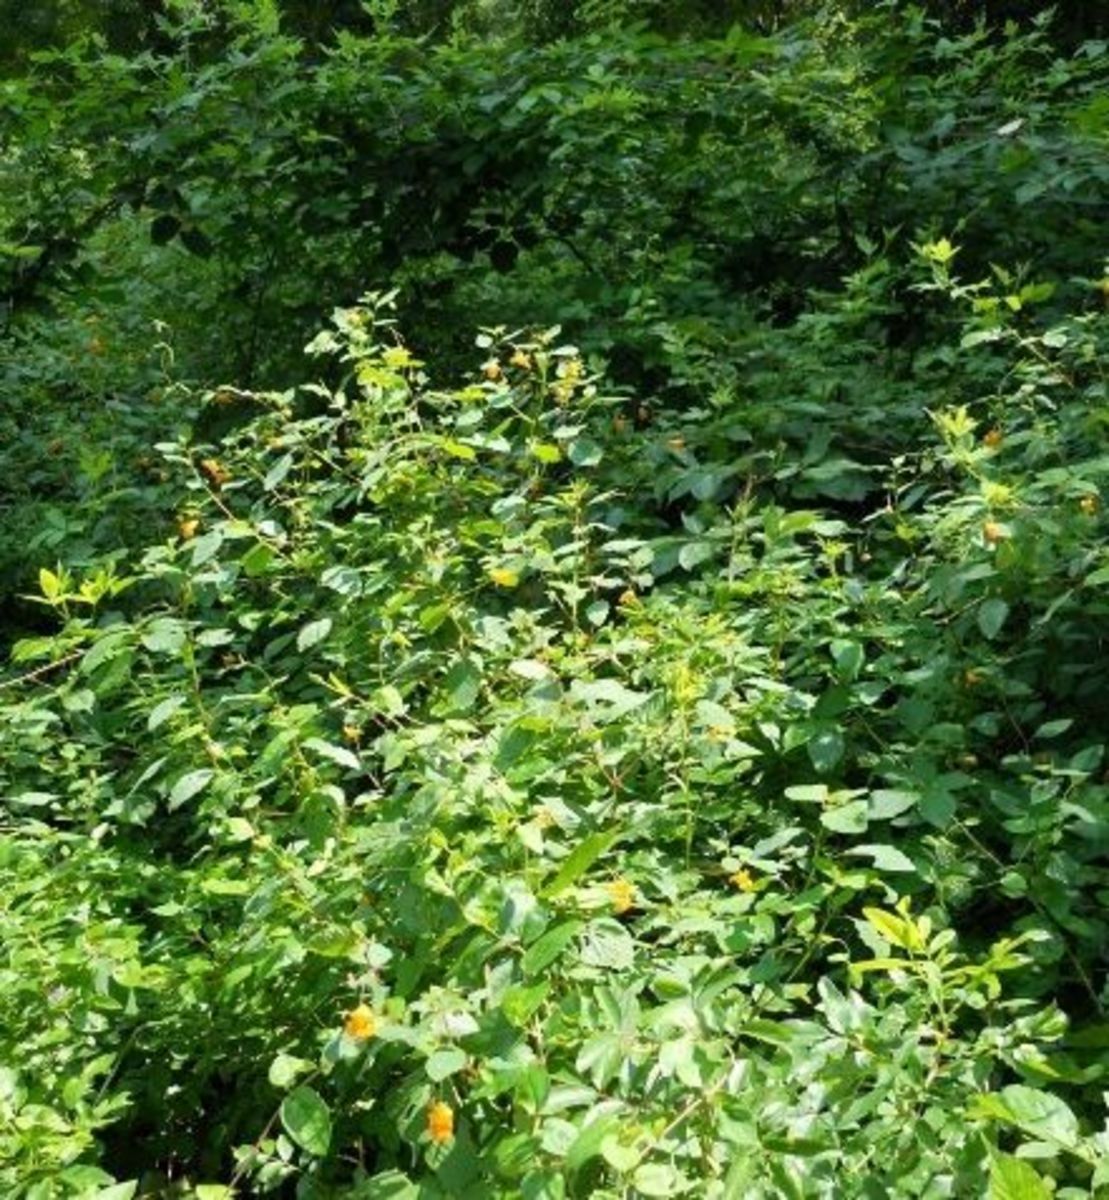 Jewel Weed—a Native American Cure for Poison Ivy